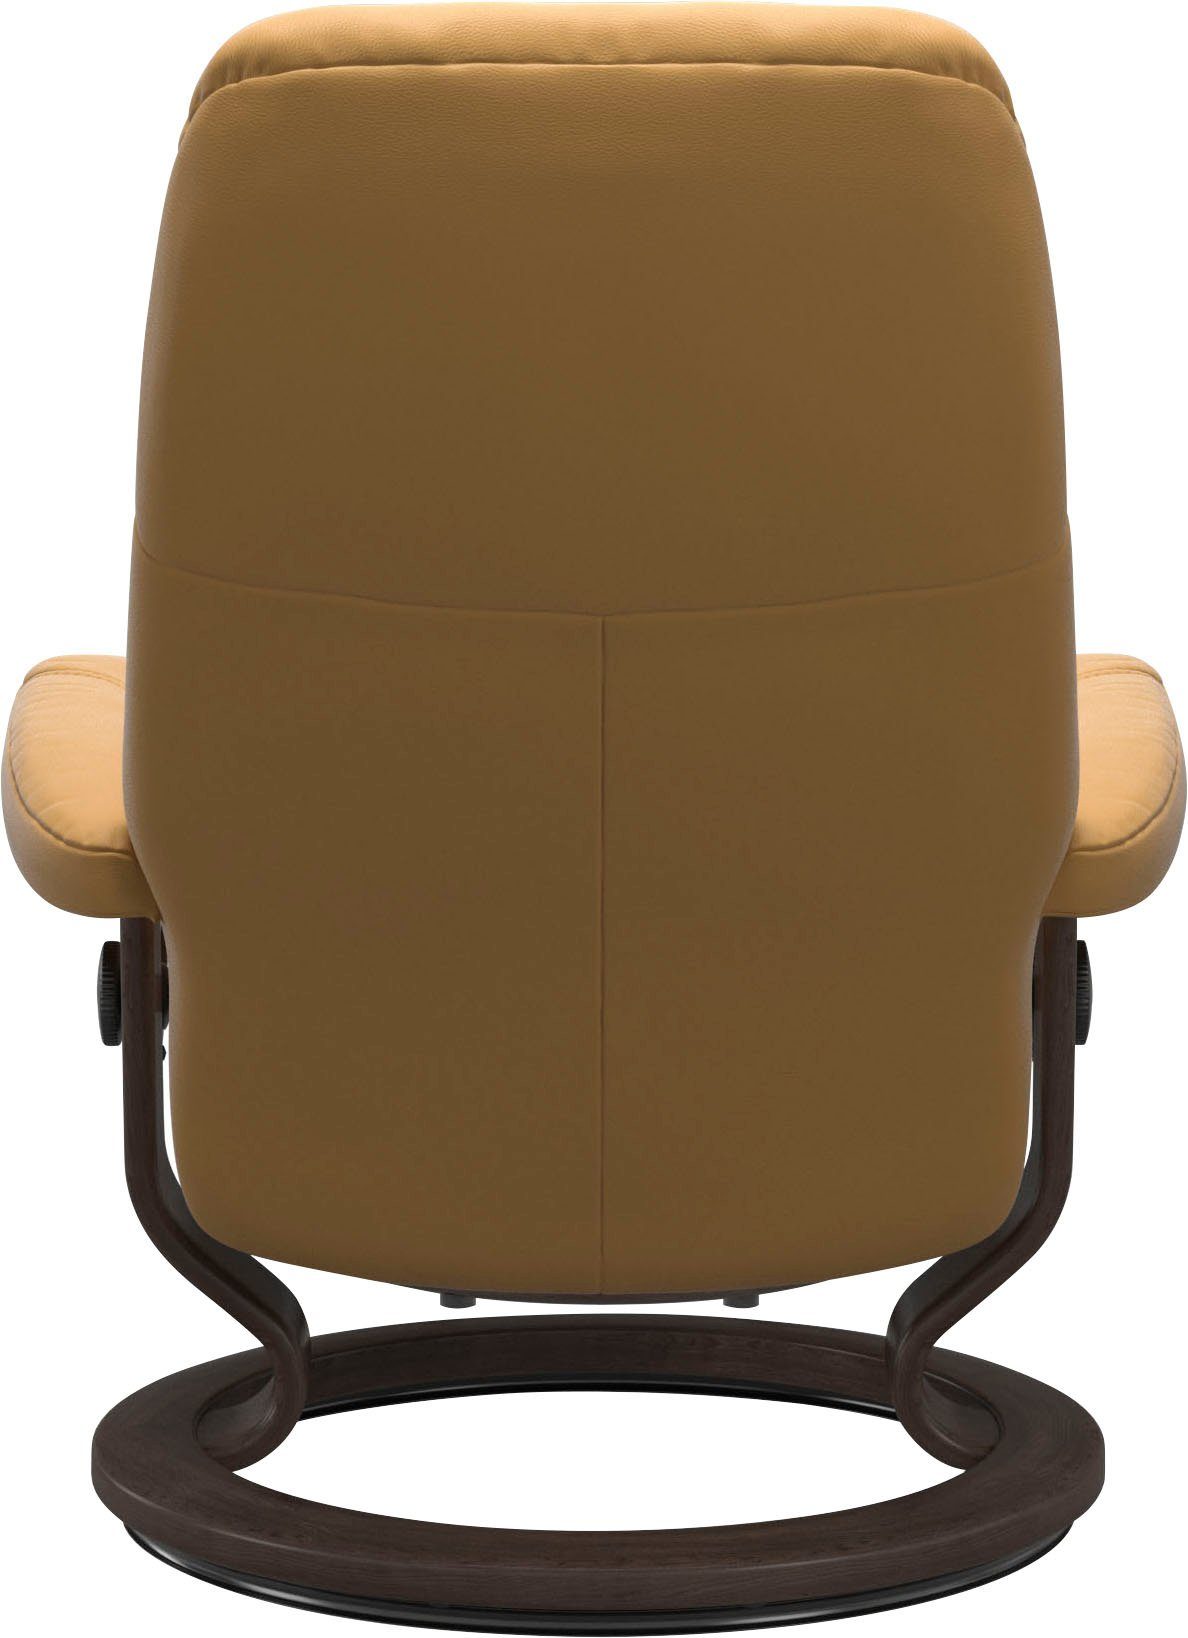 Stressless® Relaxsessel Consul, Wenge Gestell S, Base, mit Classic Größe